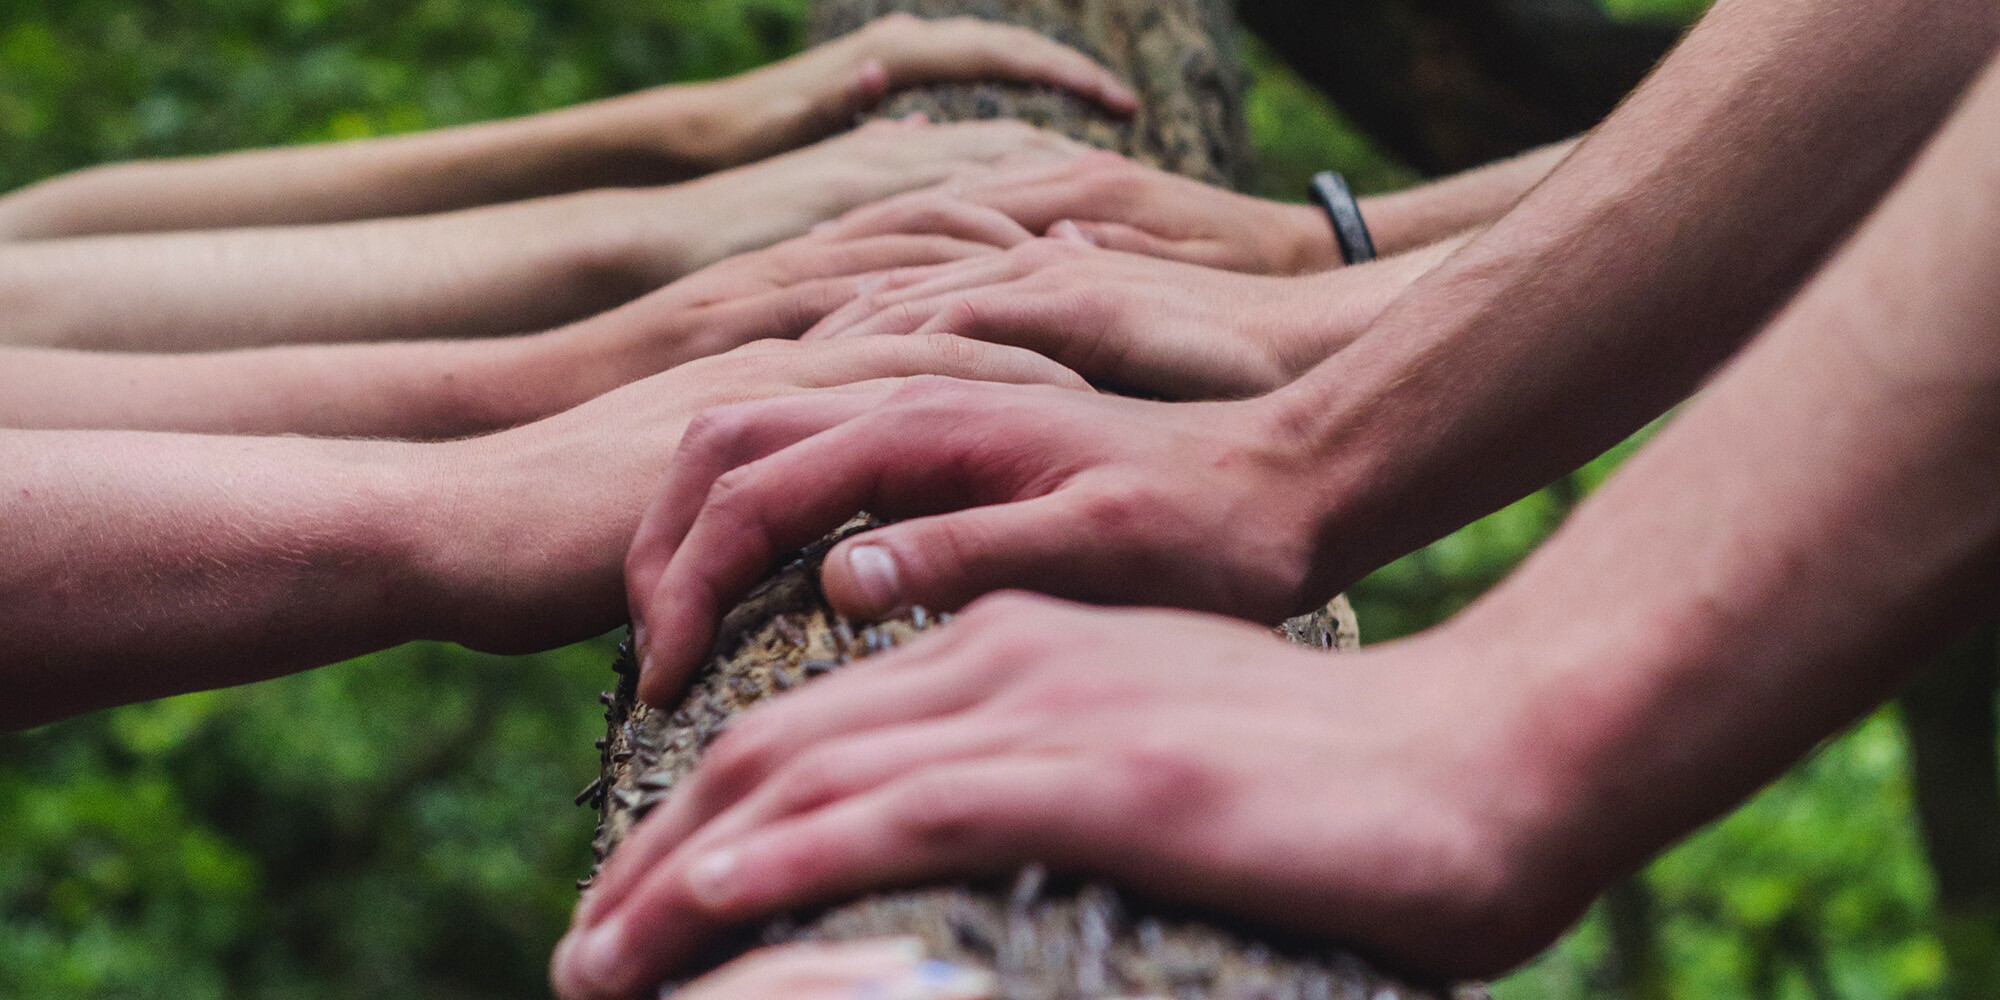 hands together on a log representing community